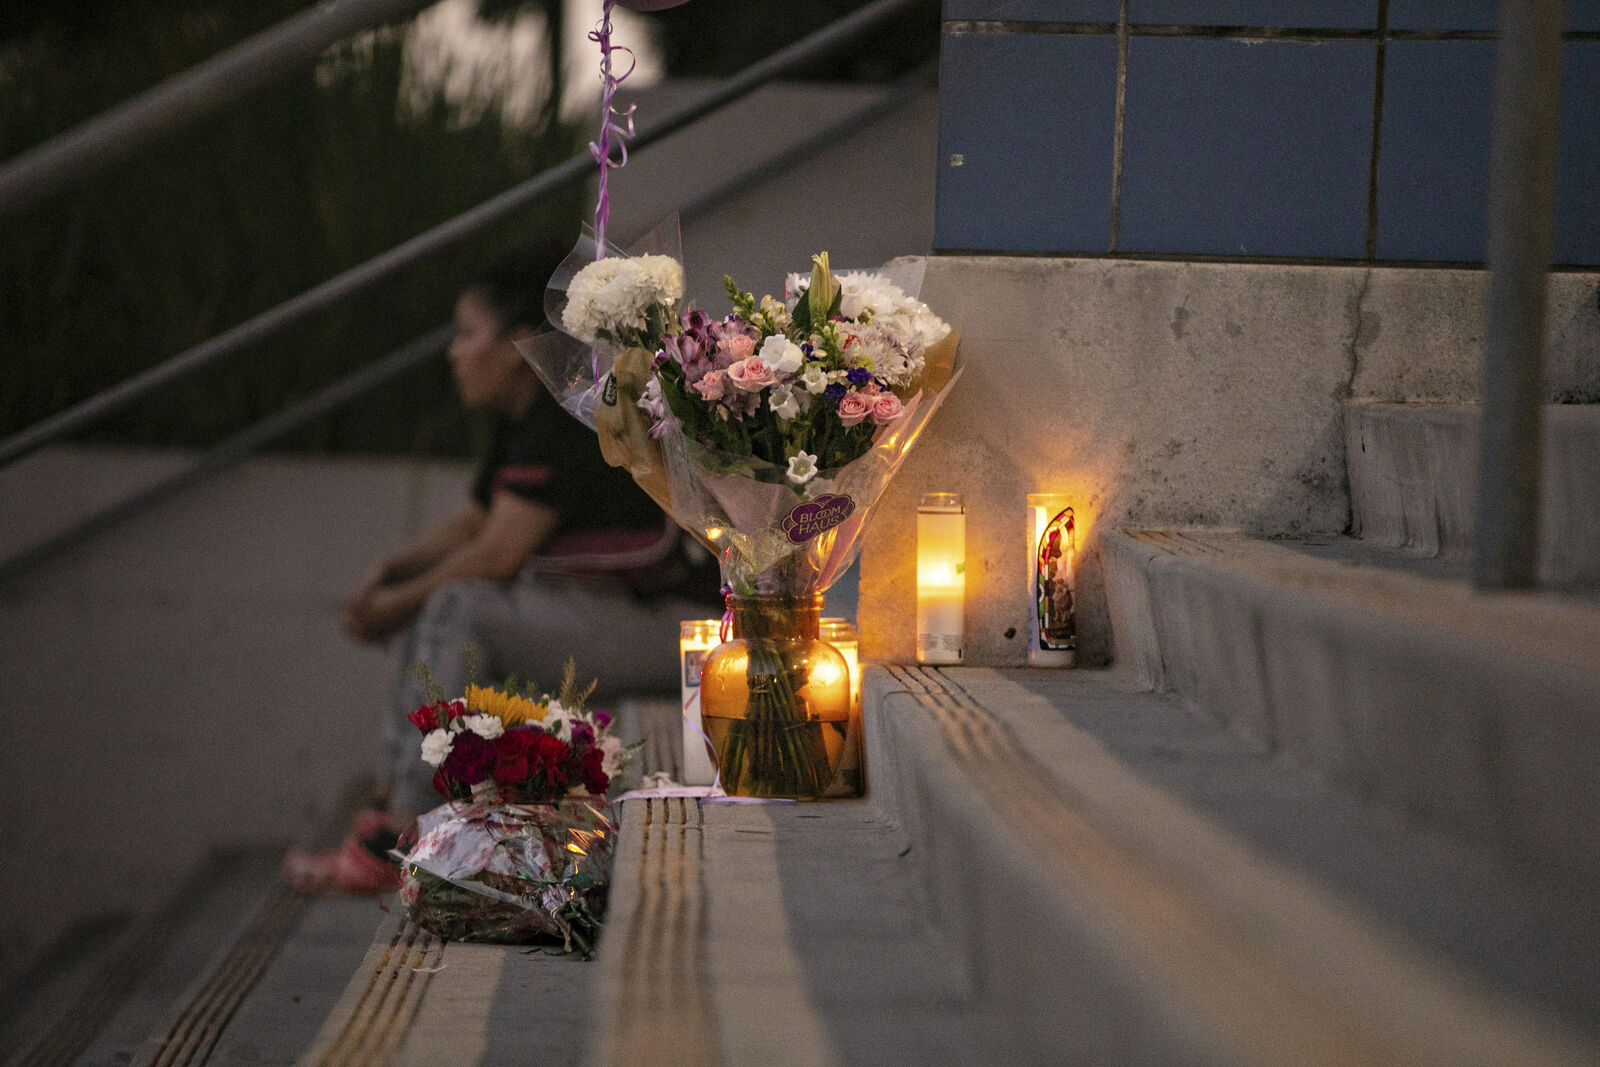 Students and community members place flowers and candles at Helen Bernstein High School where a teenage girl died of an overdose, Los Angeles, the U.S., September 15, 2022. /Jason Armond/Los Angeles Times via AP